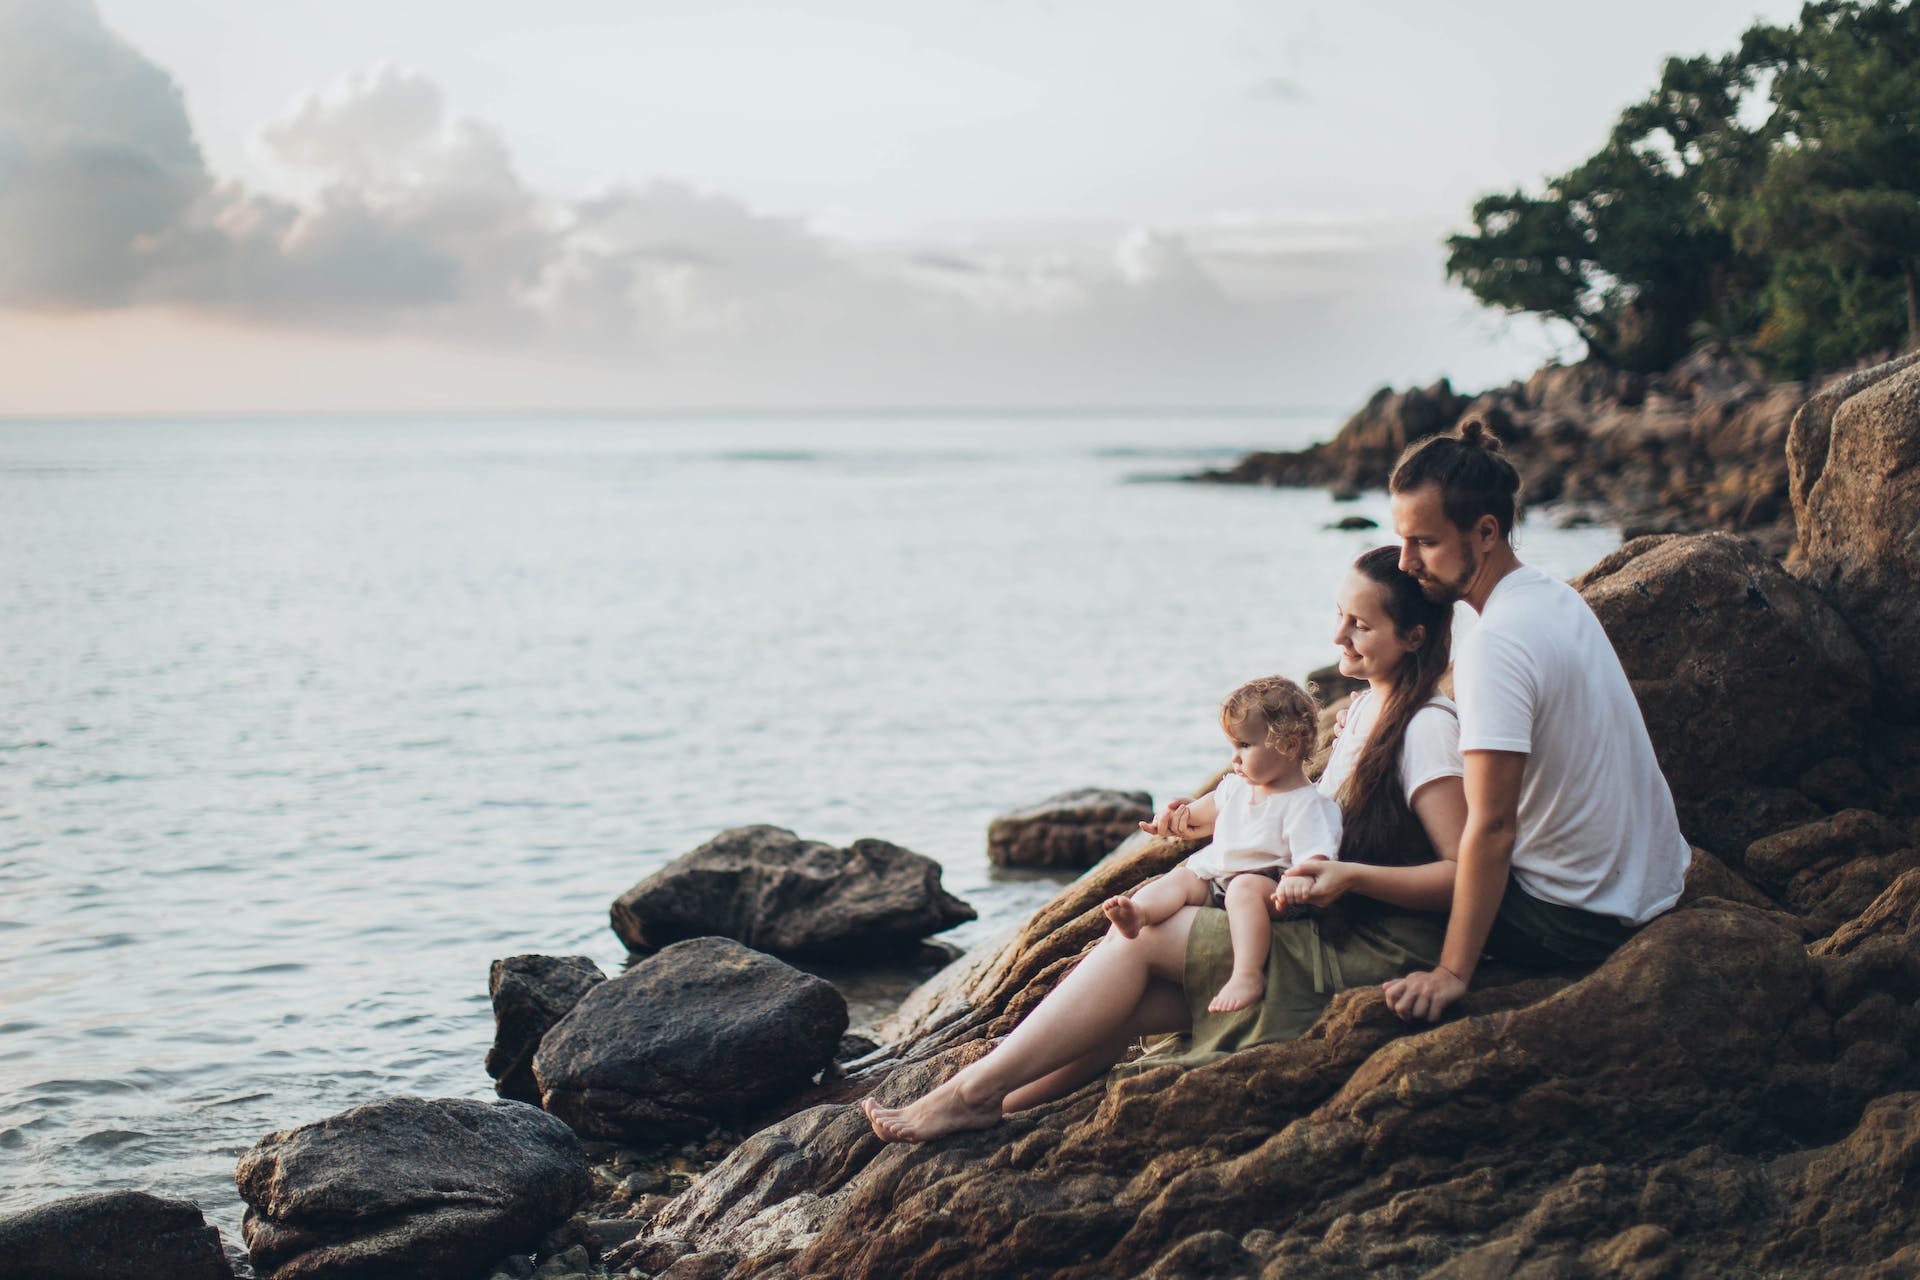 A couple sitting on rocks with their child | Source: Pexels